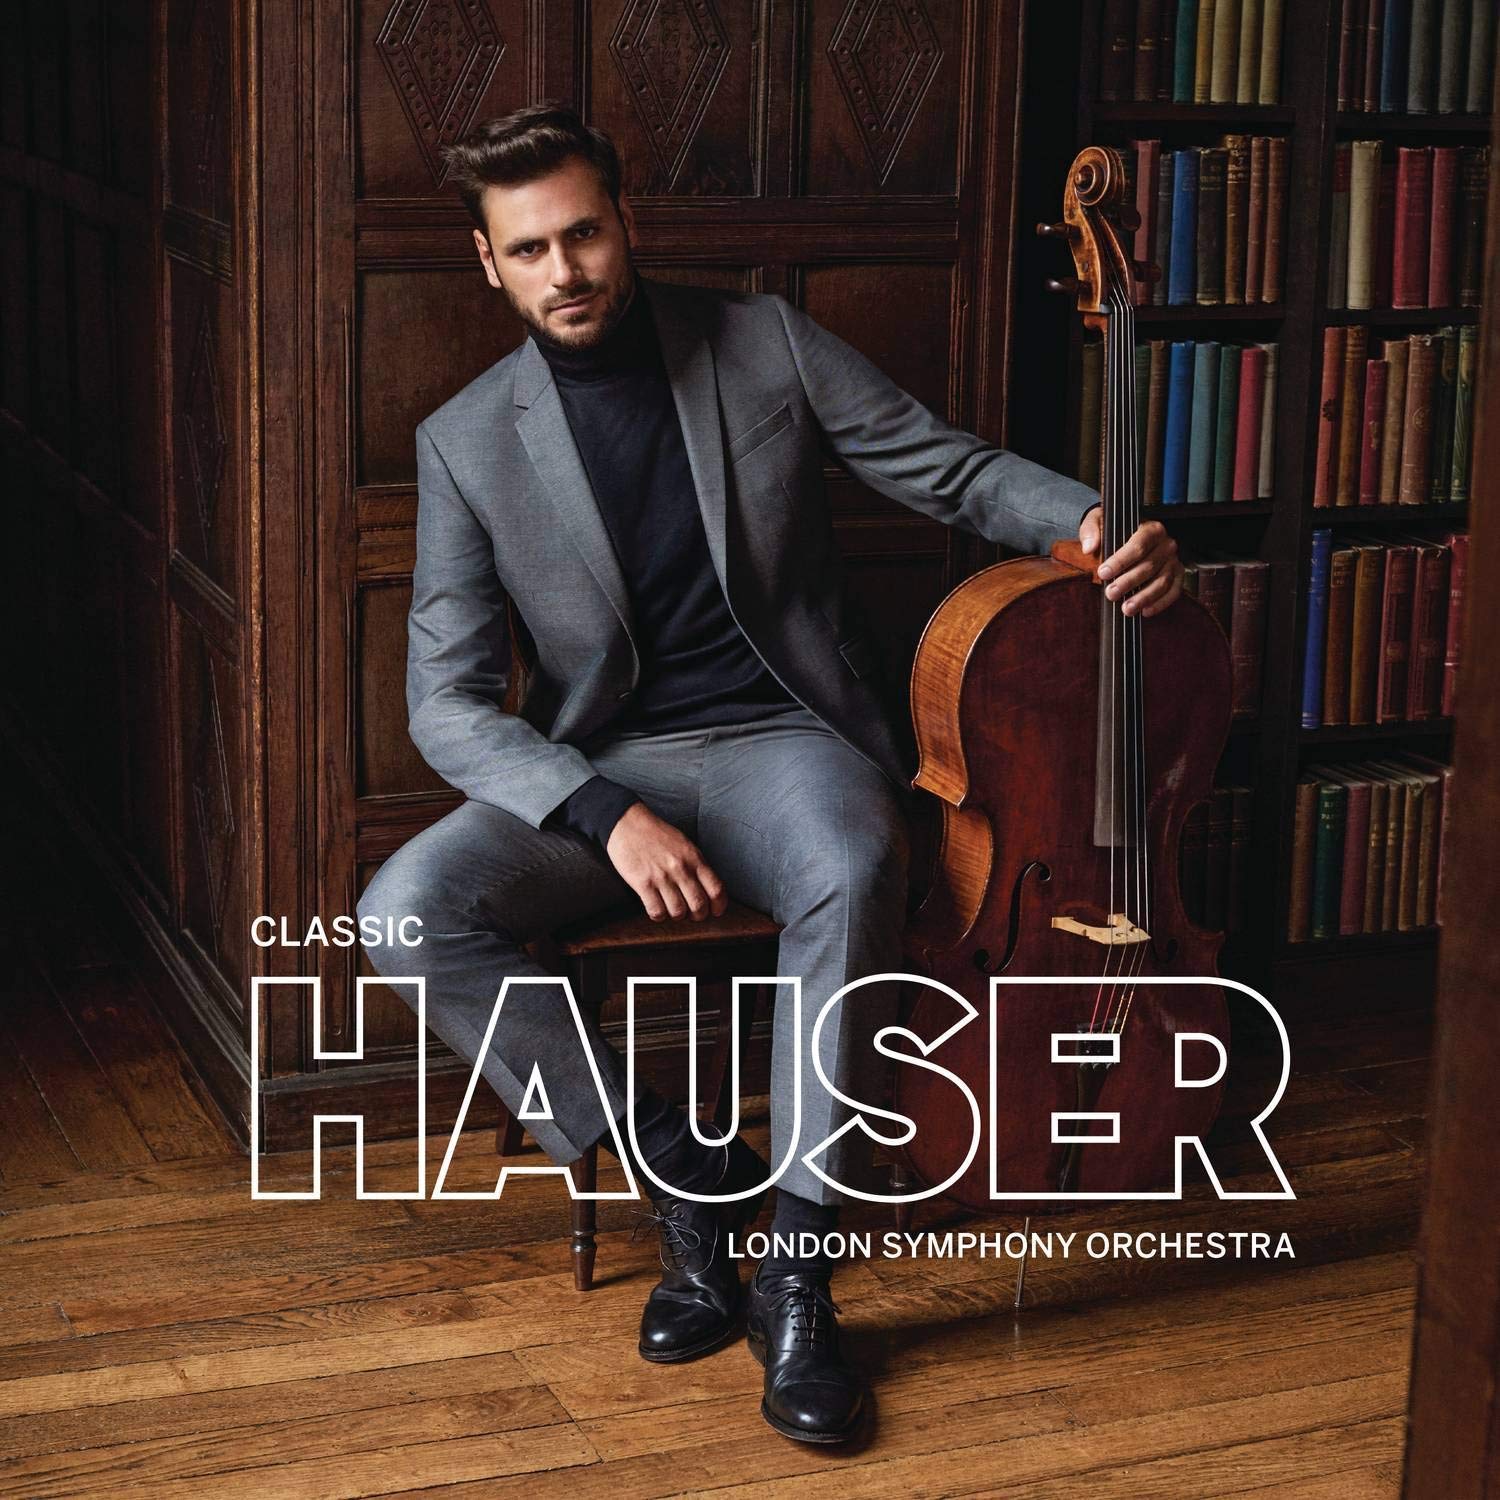 Stjepan Hauser, London Symphony Orchestra - Classic